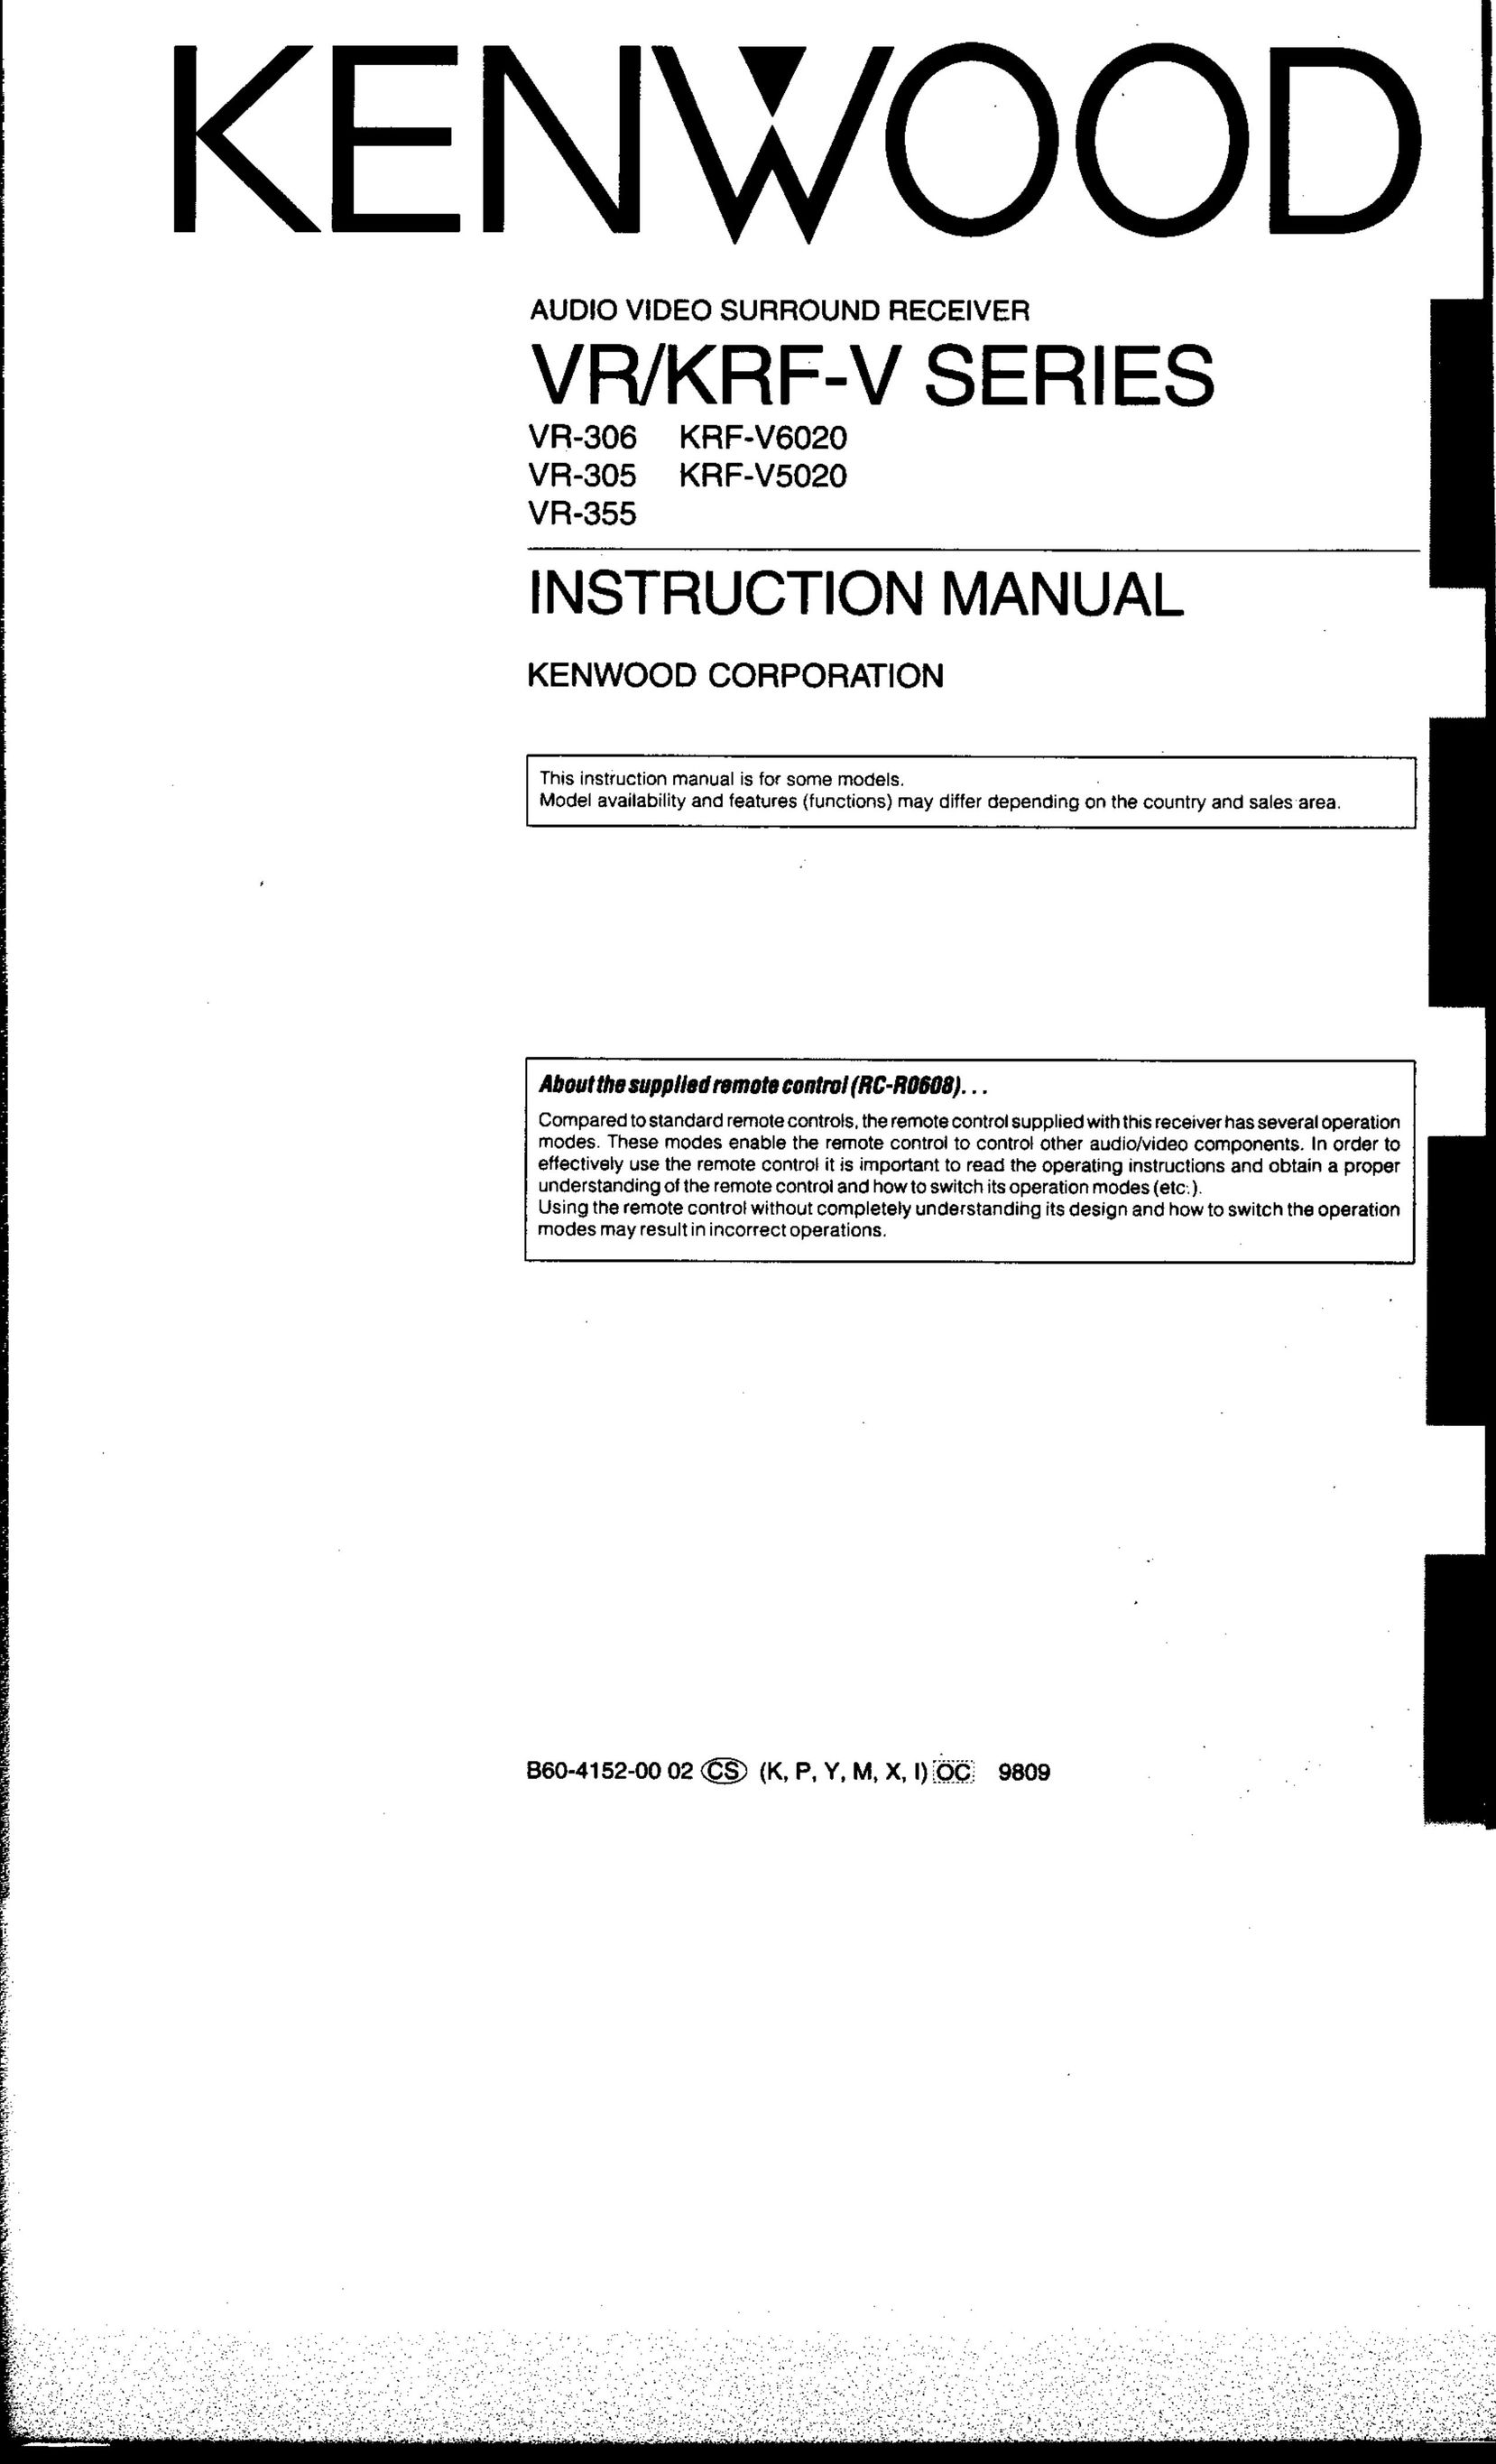 Kenwood VR-305 Home Theater System User Manual